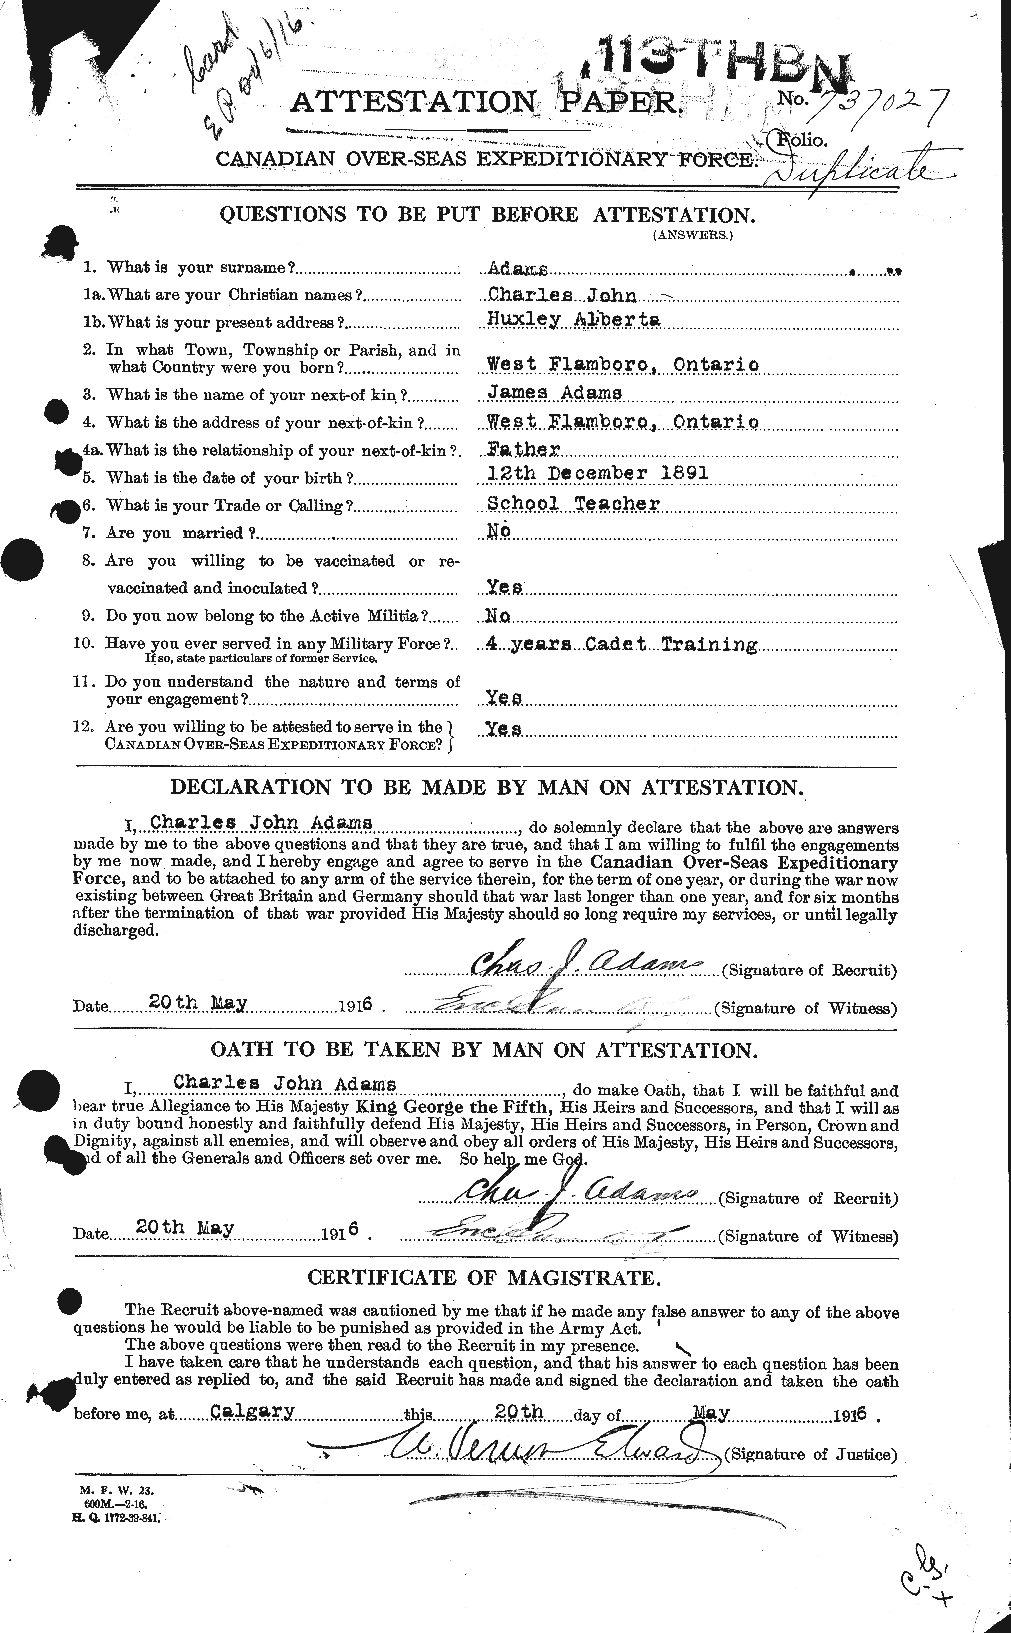 Personnel Records of the First World War - CEF 202573a